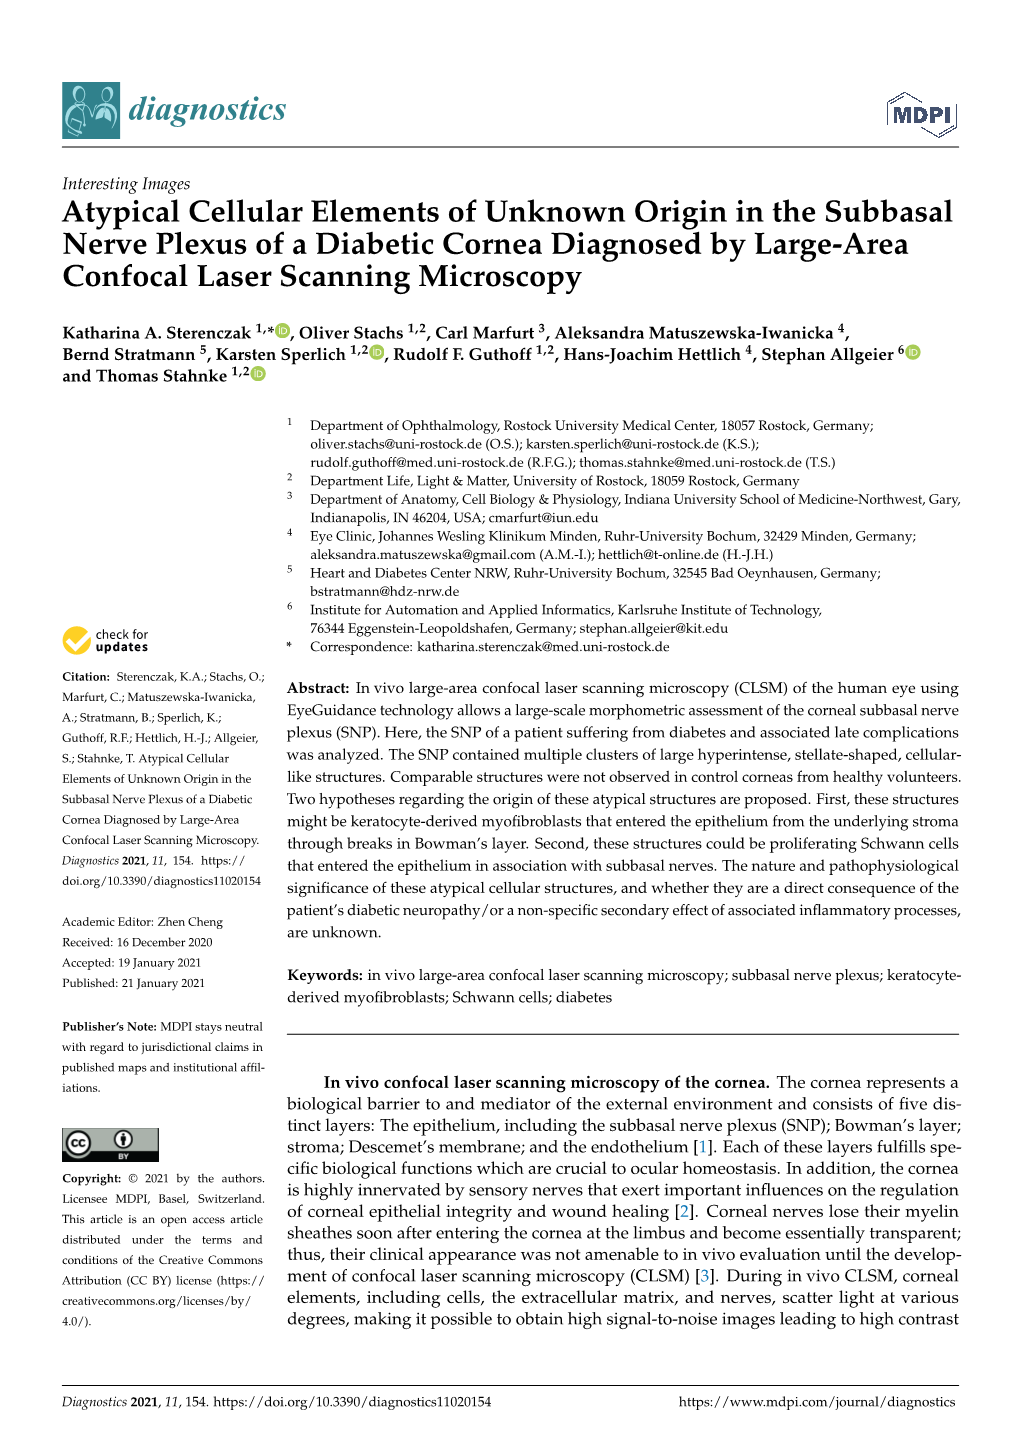 Atypical Cellular Elements of Unknown Origin in the Subbasal Nerve Plexus of a Diabetic Cornea Diagnosed by Large-Area Confocal Laser Scanning Microscopy